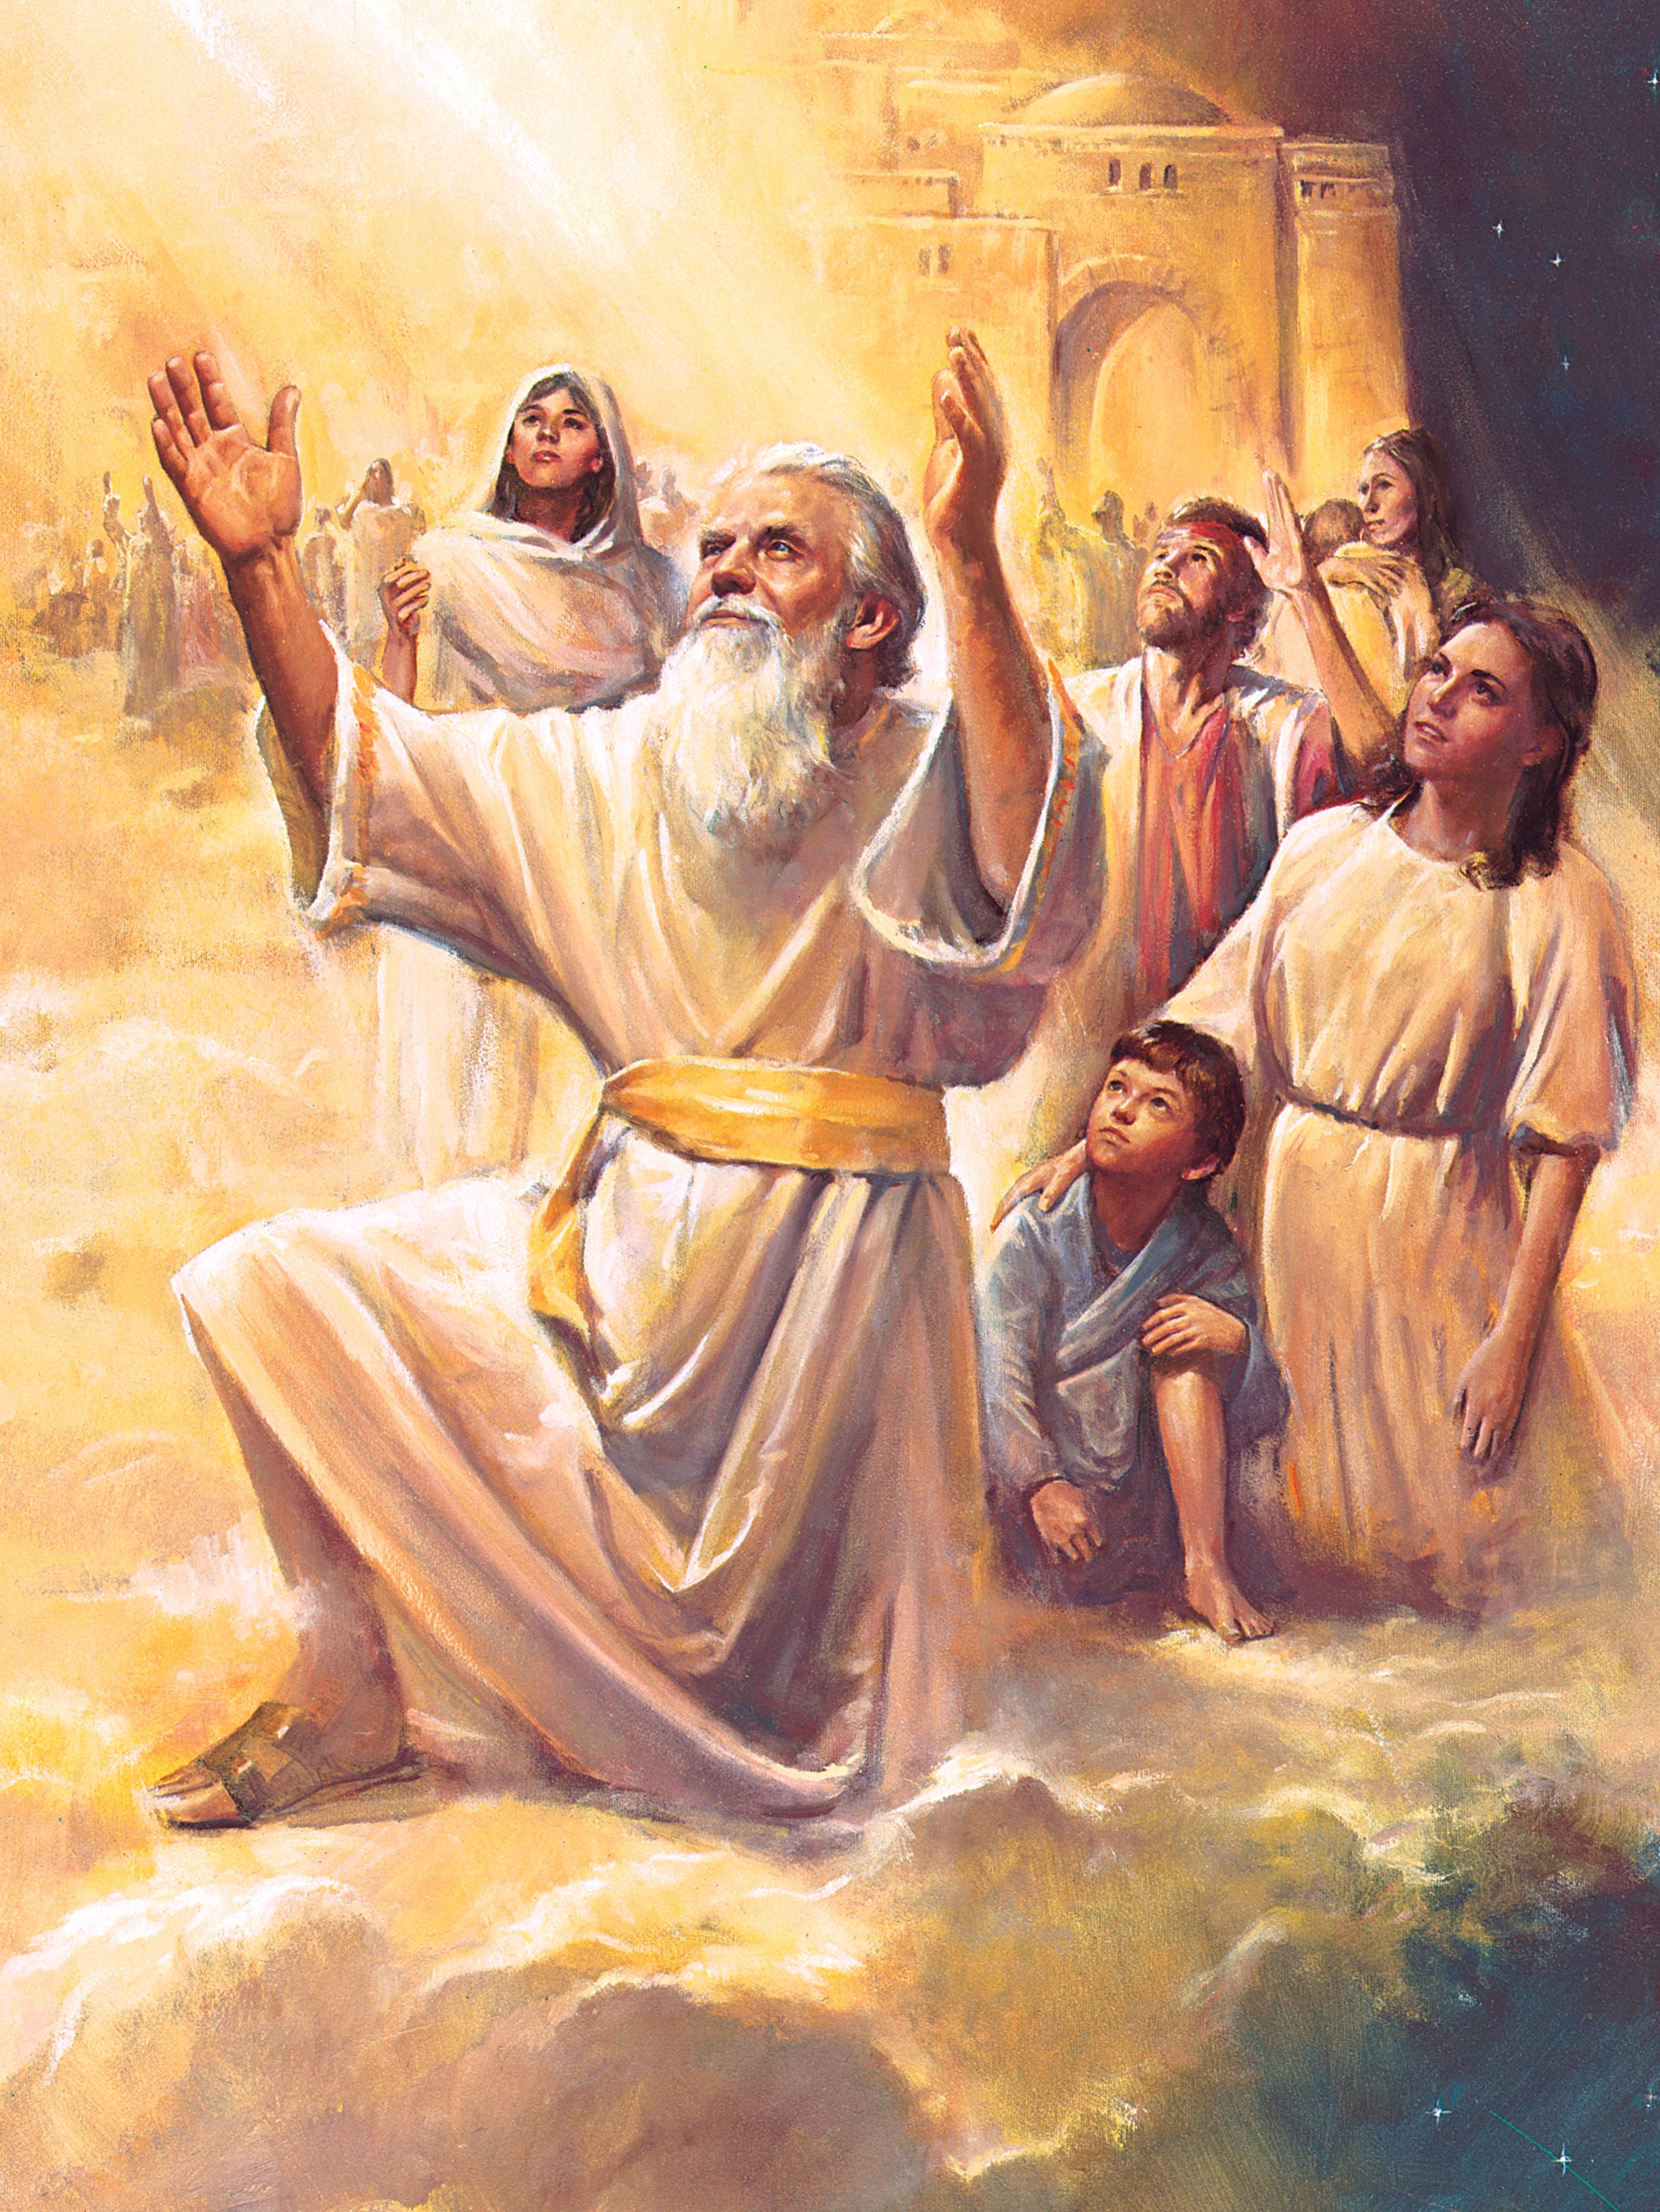 The Old Testament prophet Enoch and people from the City of Zion being translated.  The people are depicted kneeling on a cloud.  Enoch has his arms raised in the air.